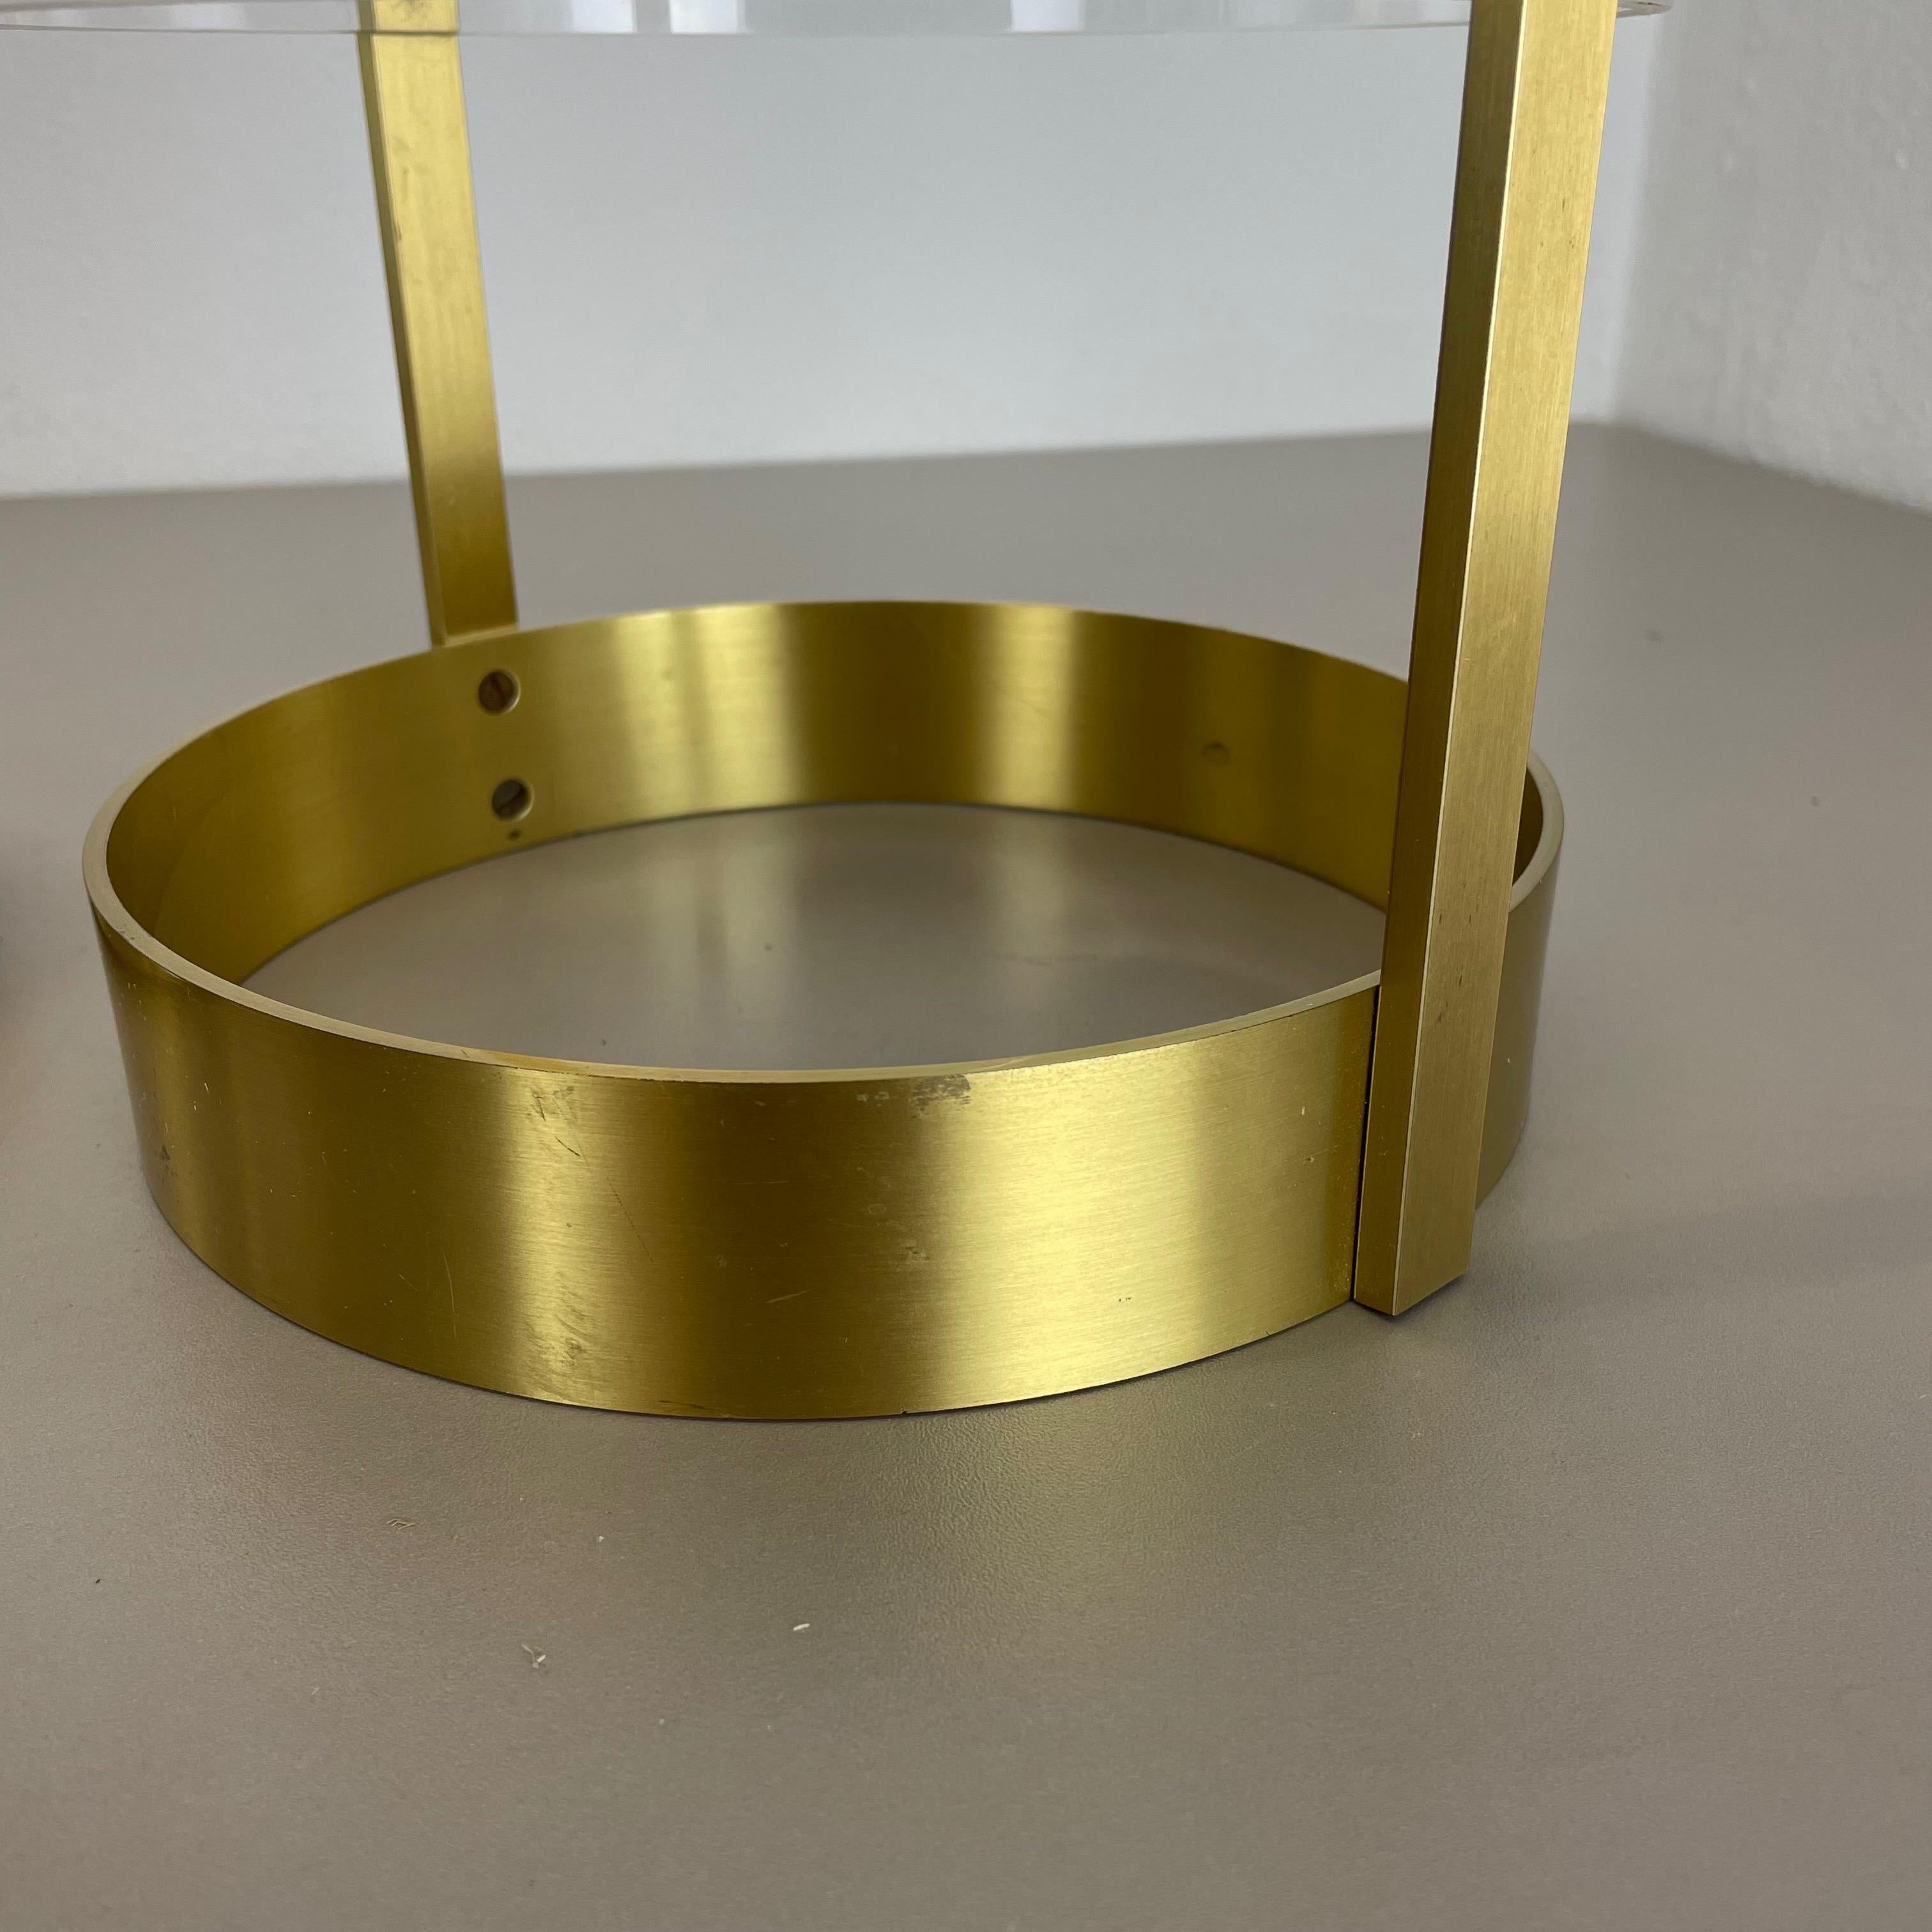 Original Hollywood Regency Solid Brass Acryl Glass Umbrella Stand, Italy, 1970s For Sale 10